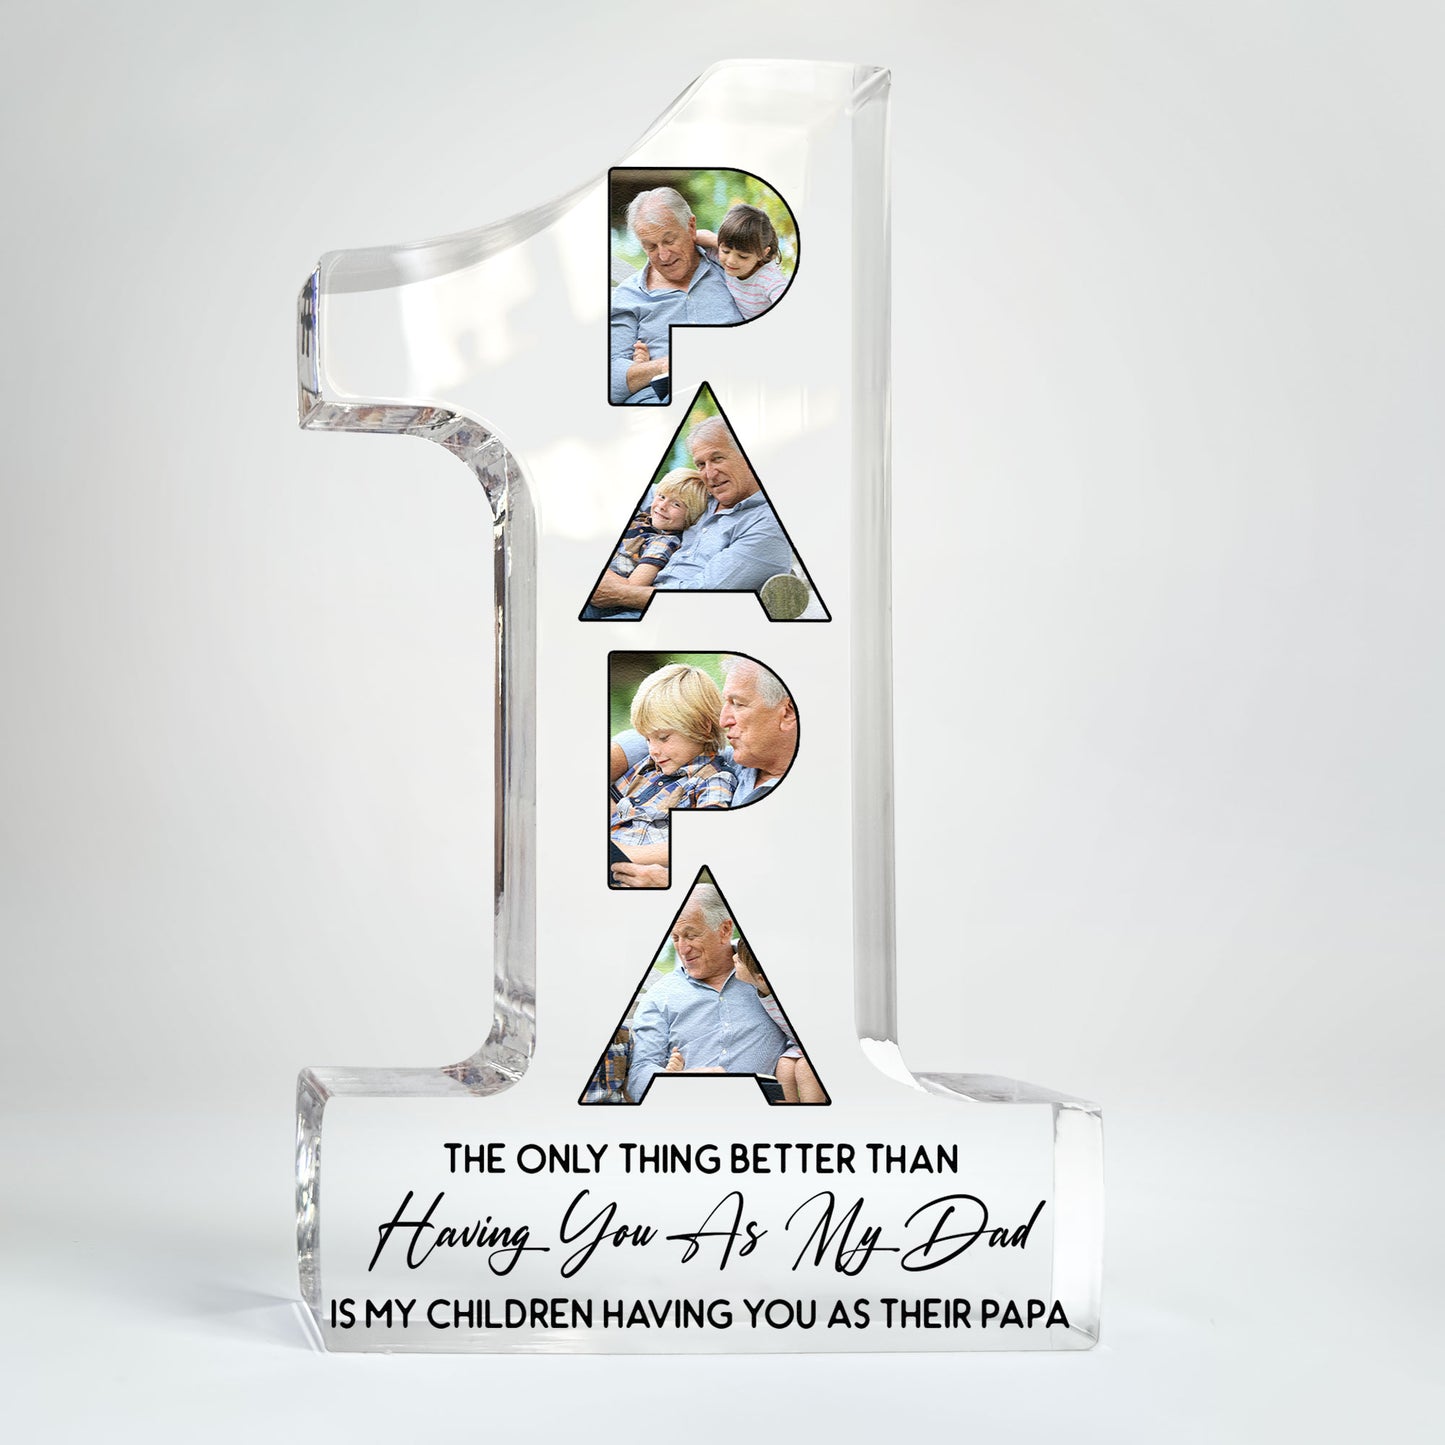 #1 Christmas Gift For Dad, Grandpa - Personalized Acrylic Photo Plaque